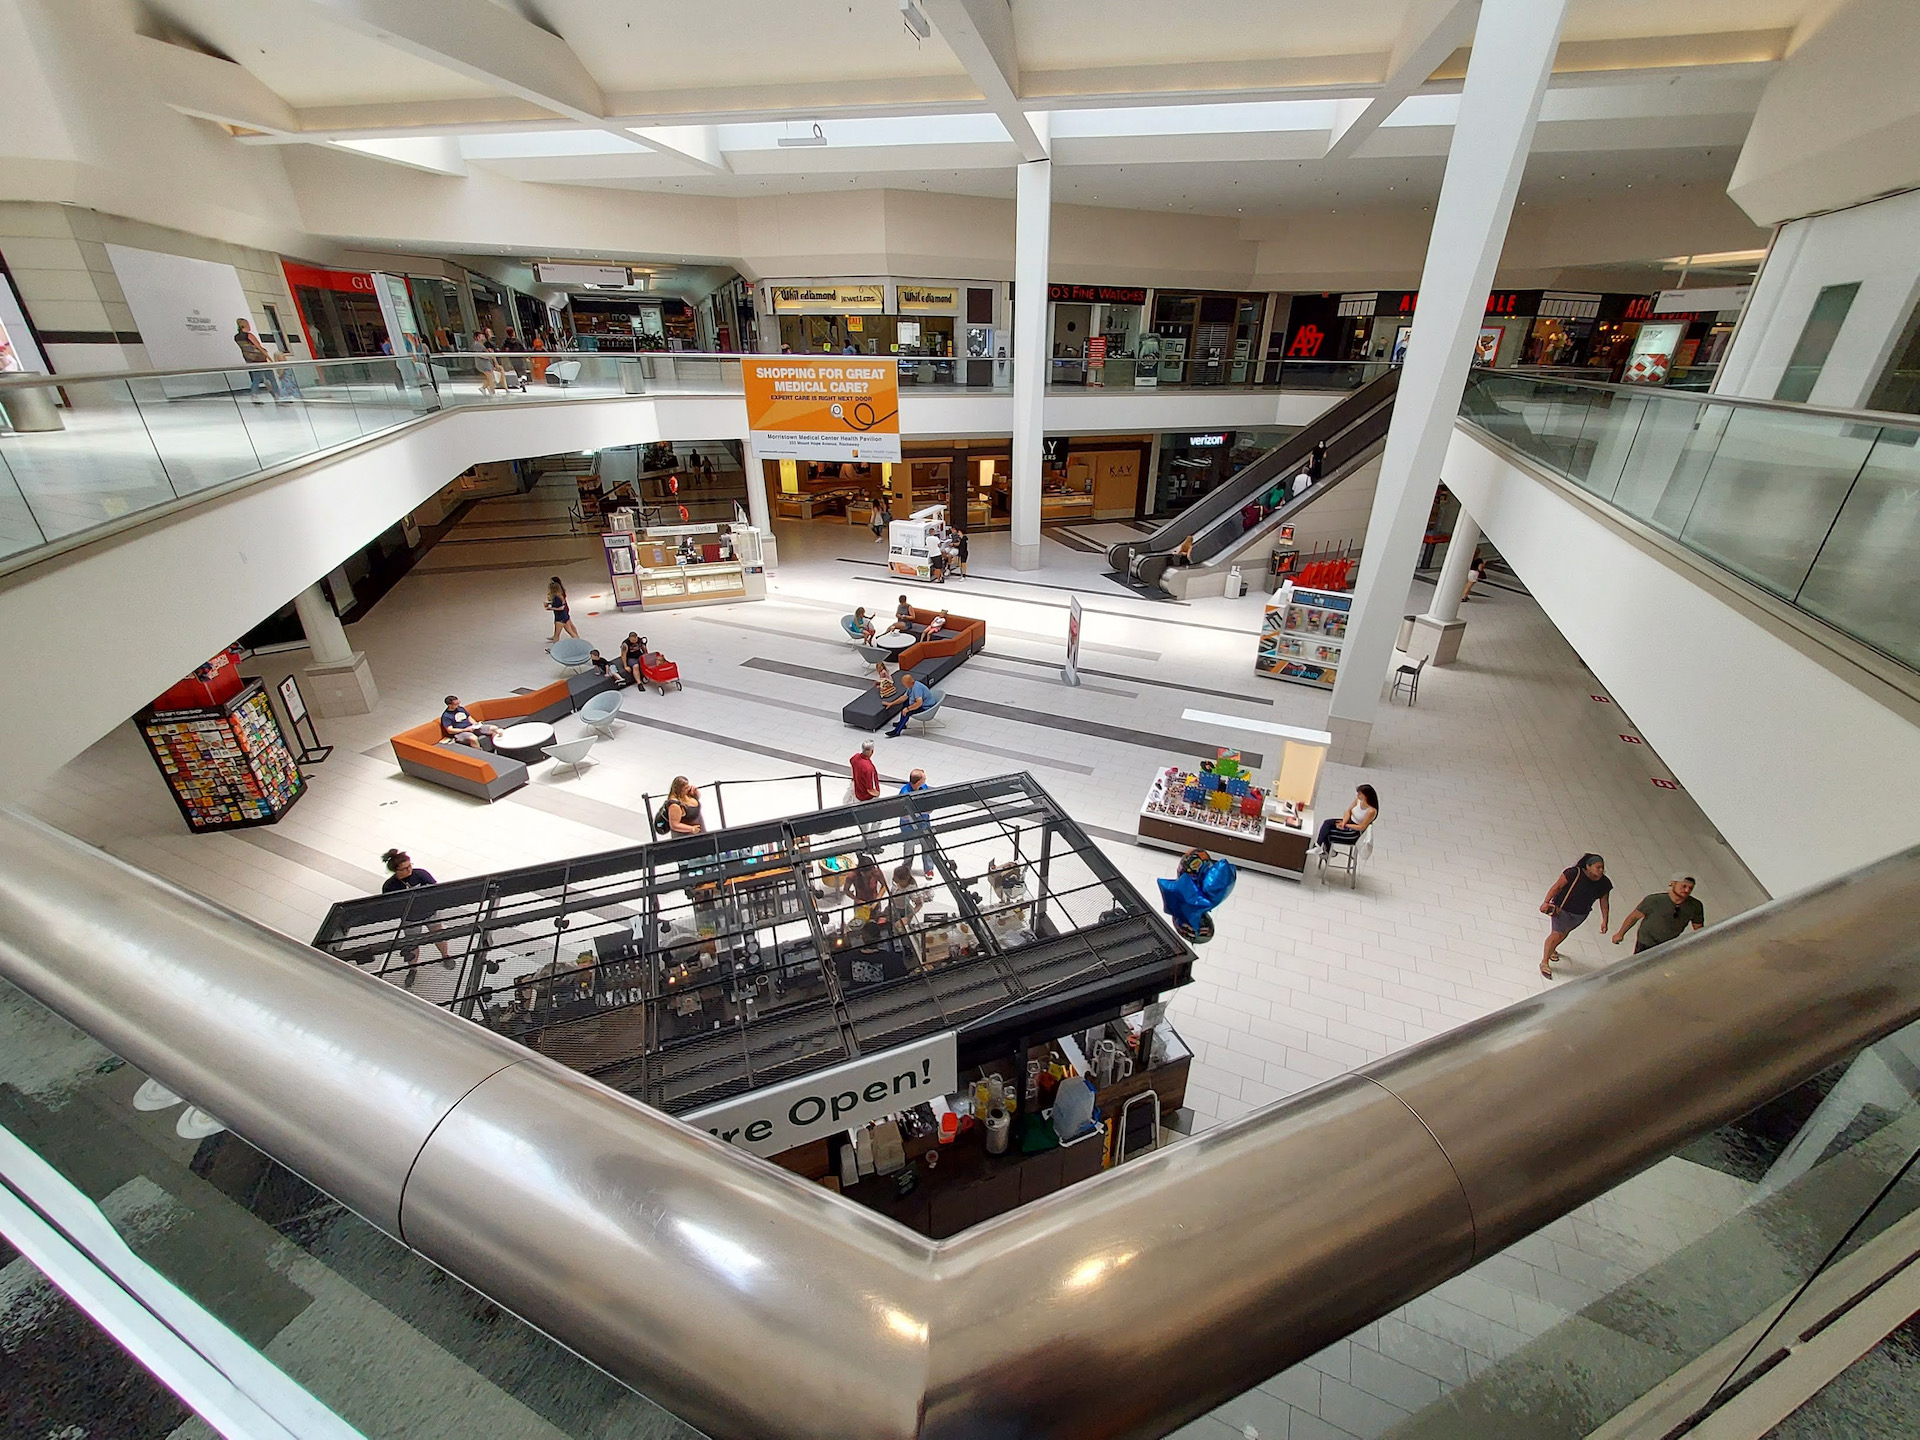 Samsung Galaxy A42 photo sample wide angle showing the interior view of a mall looking down from above